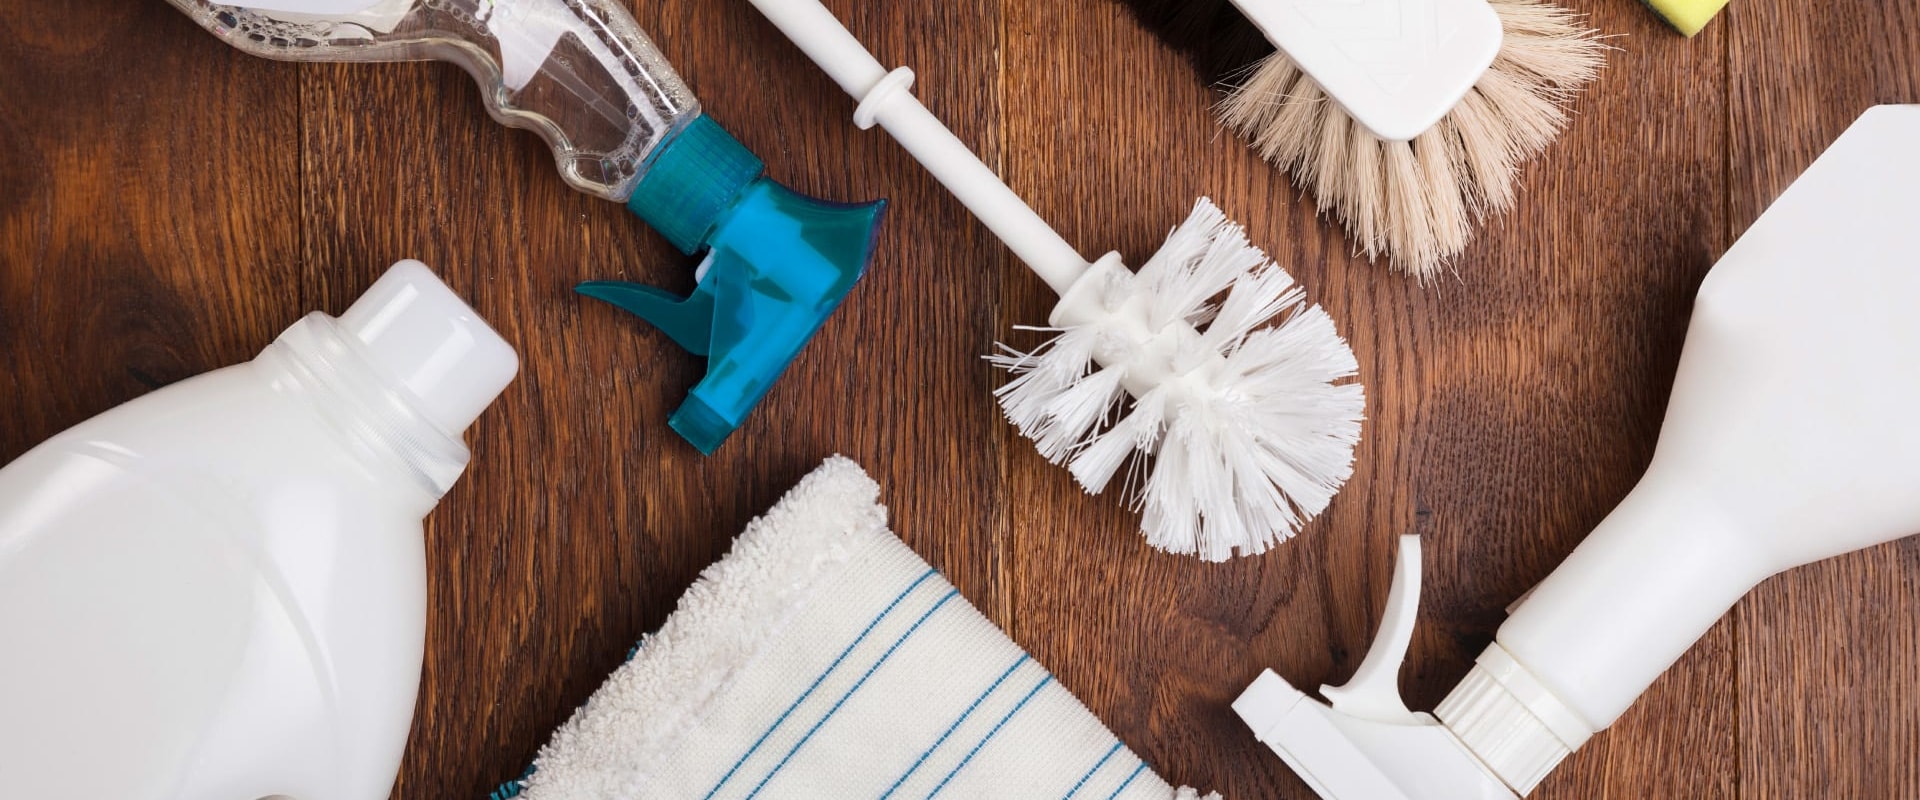 The Ultimate Guide to Keeping Vacation Rentals Clean and Sanitized